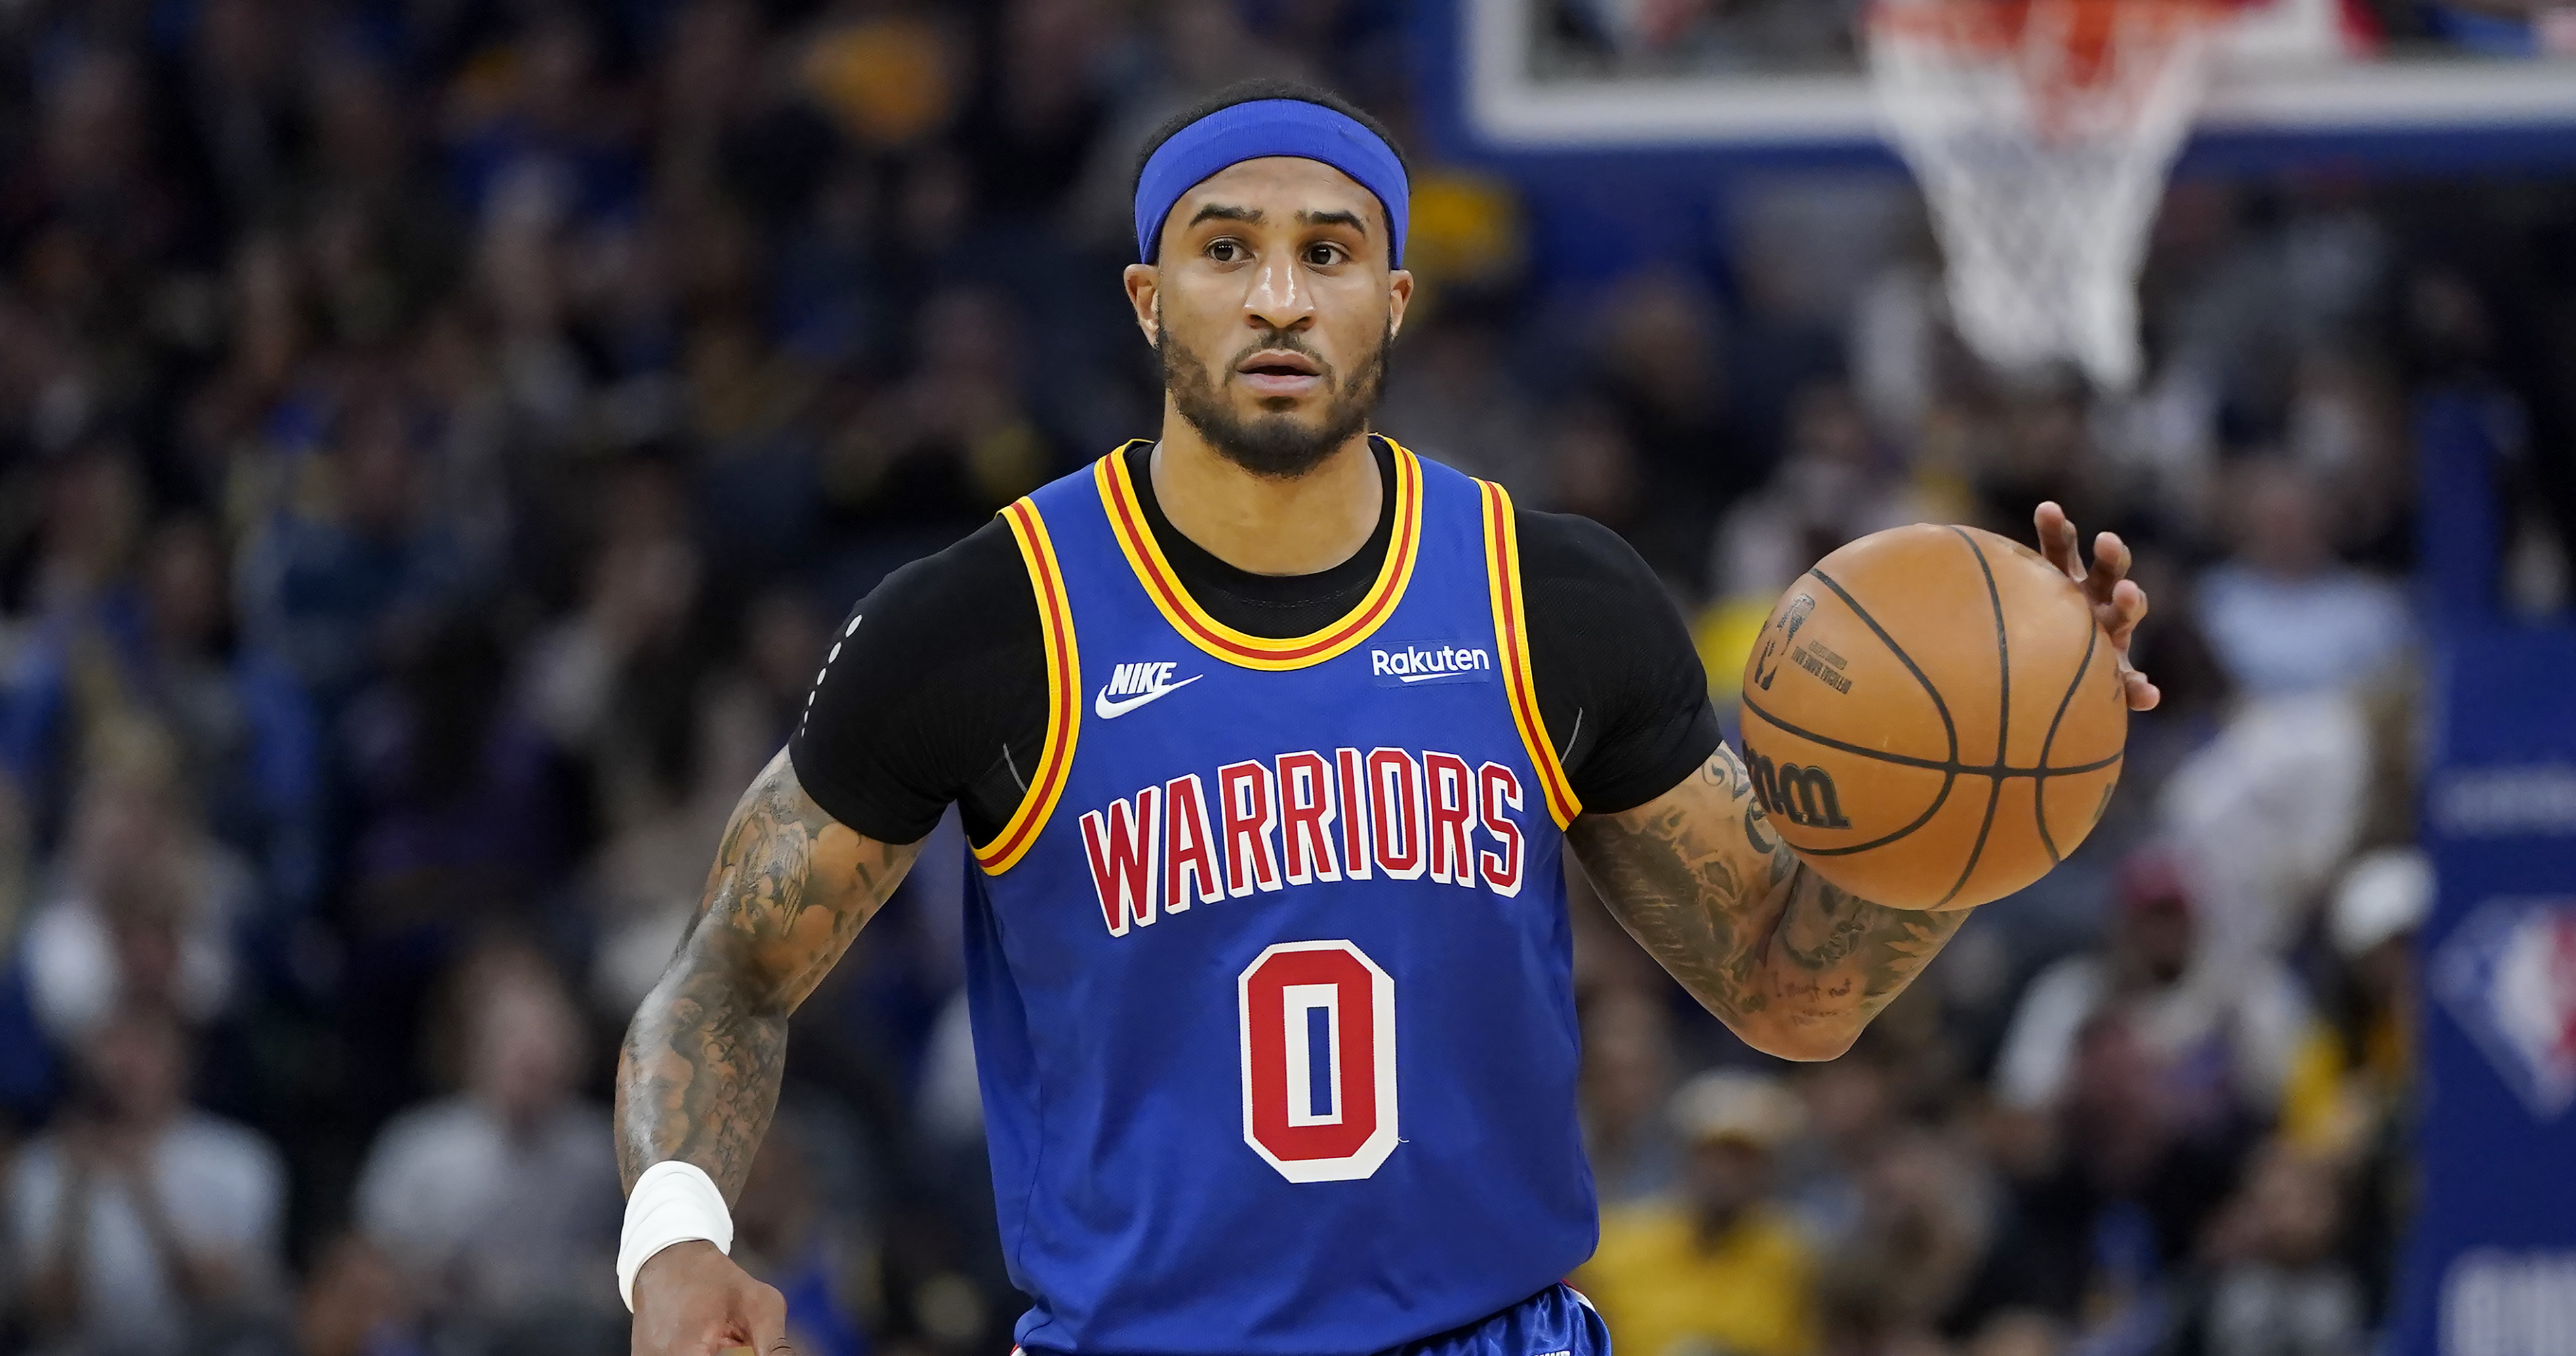 Gary Payton II is BACK with the Golden State Warriors! 